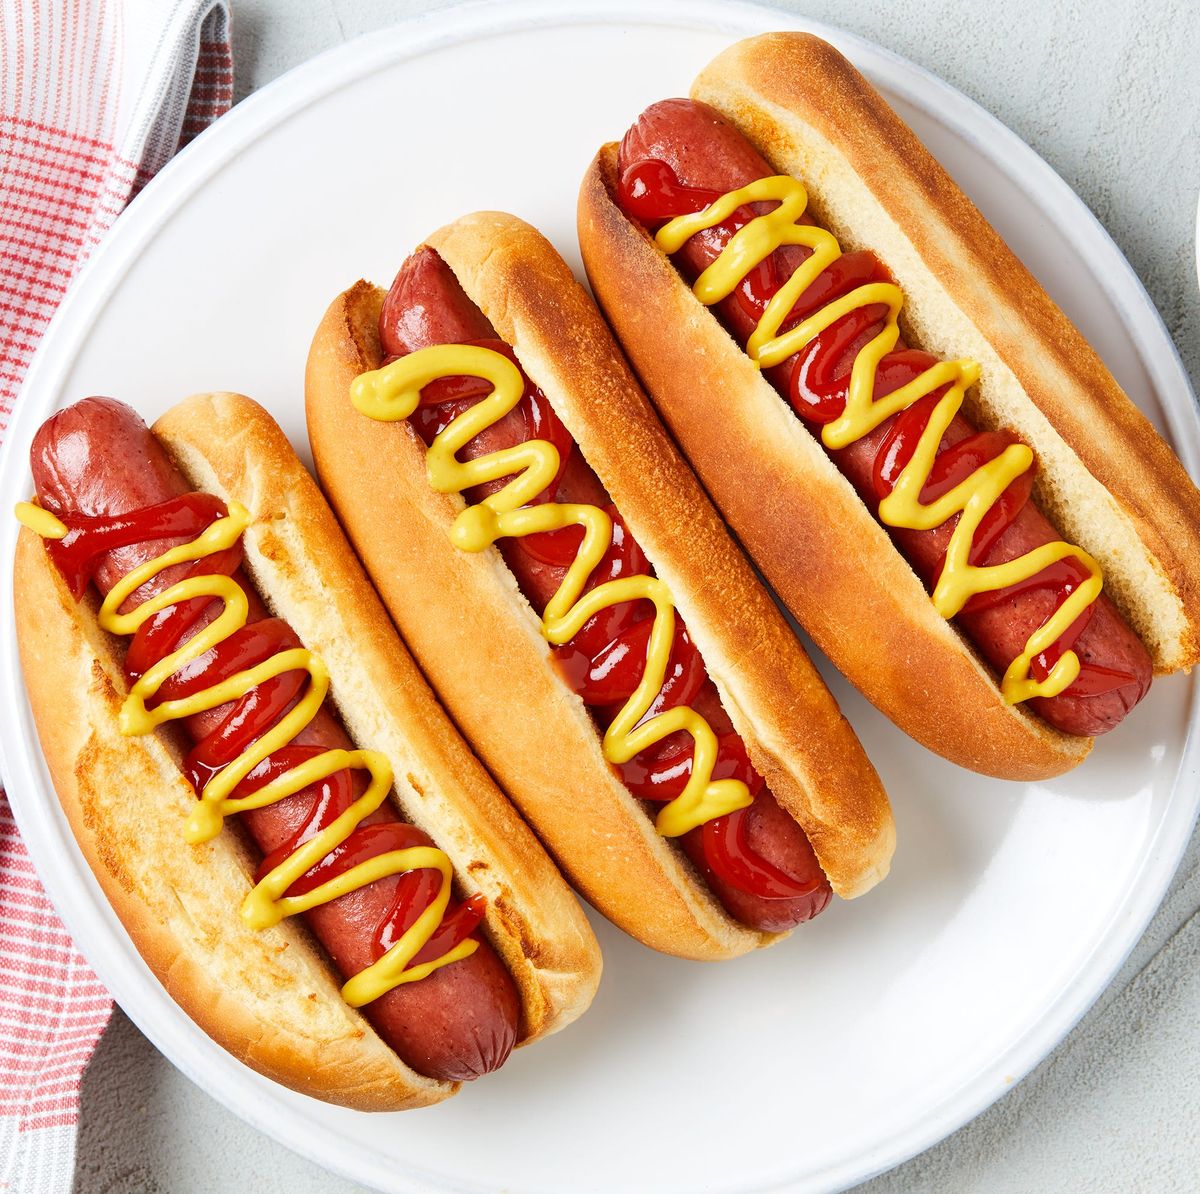 Best Air Fryer Hot Dogs Recipe - How To Make Air Fryer Hot Dogs